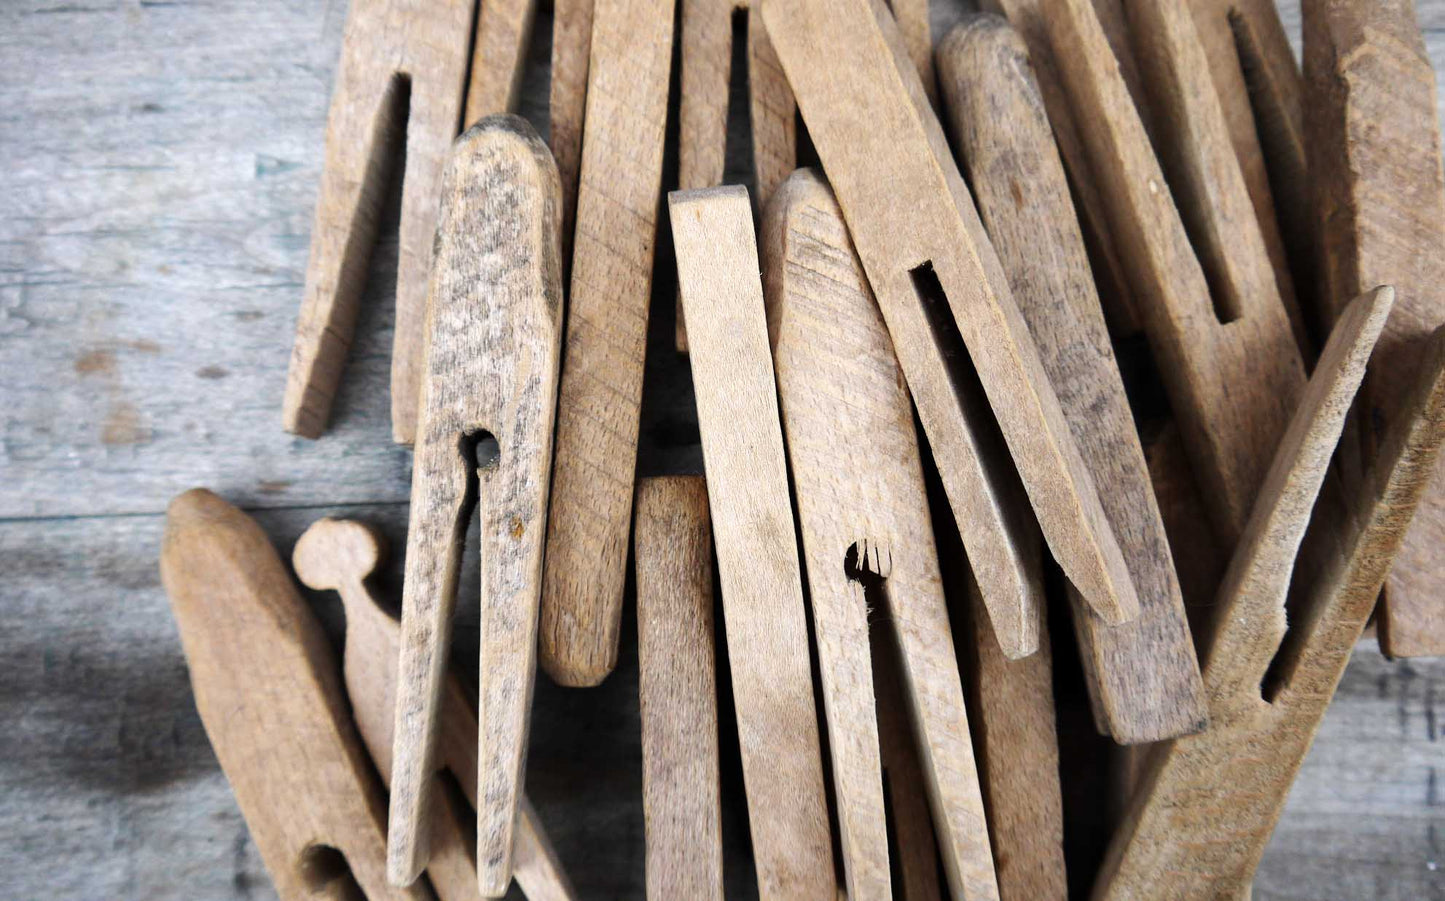 Rustic french vintage clothes pegs